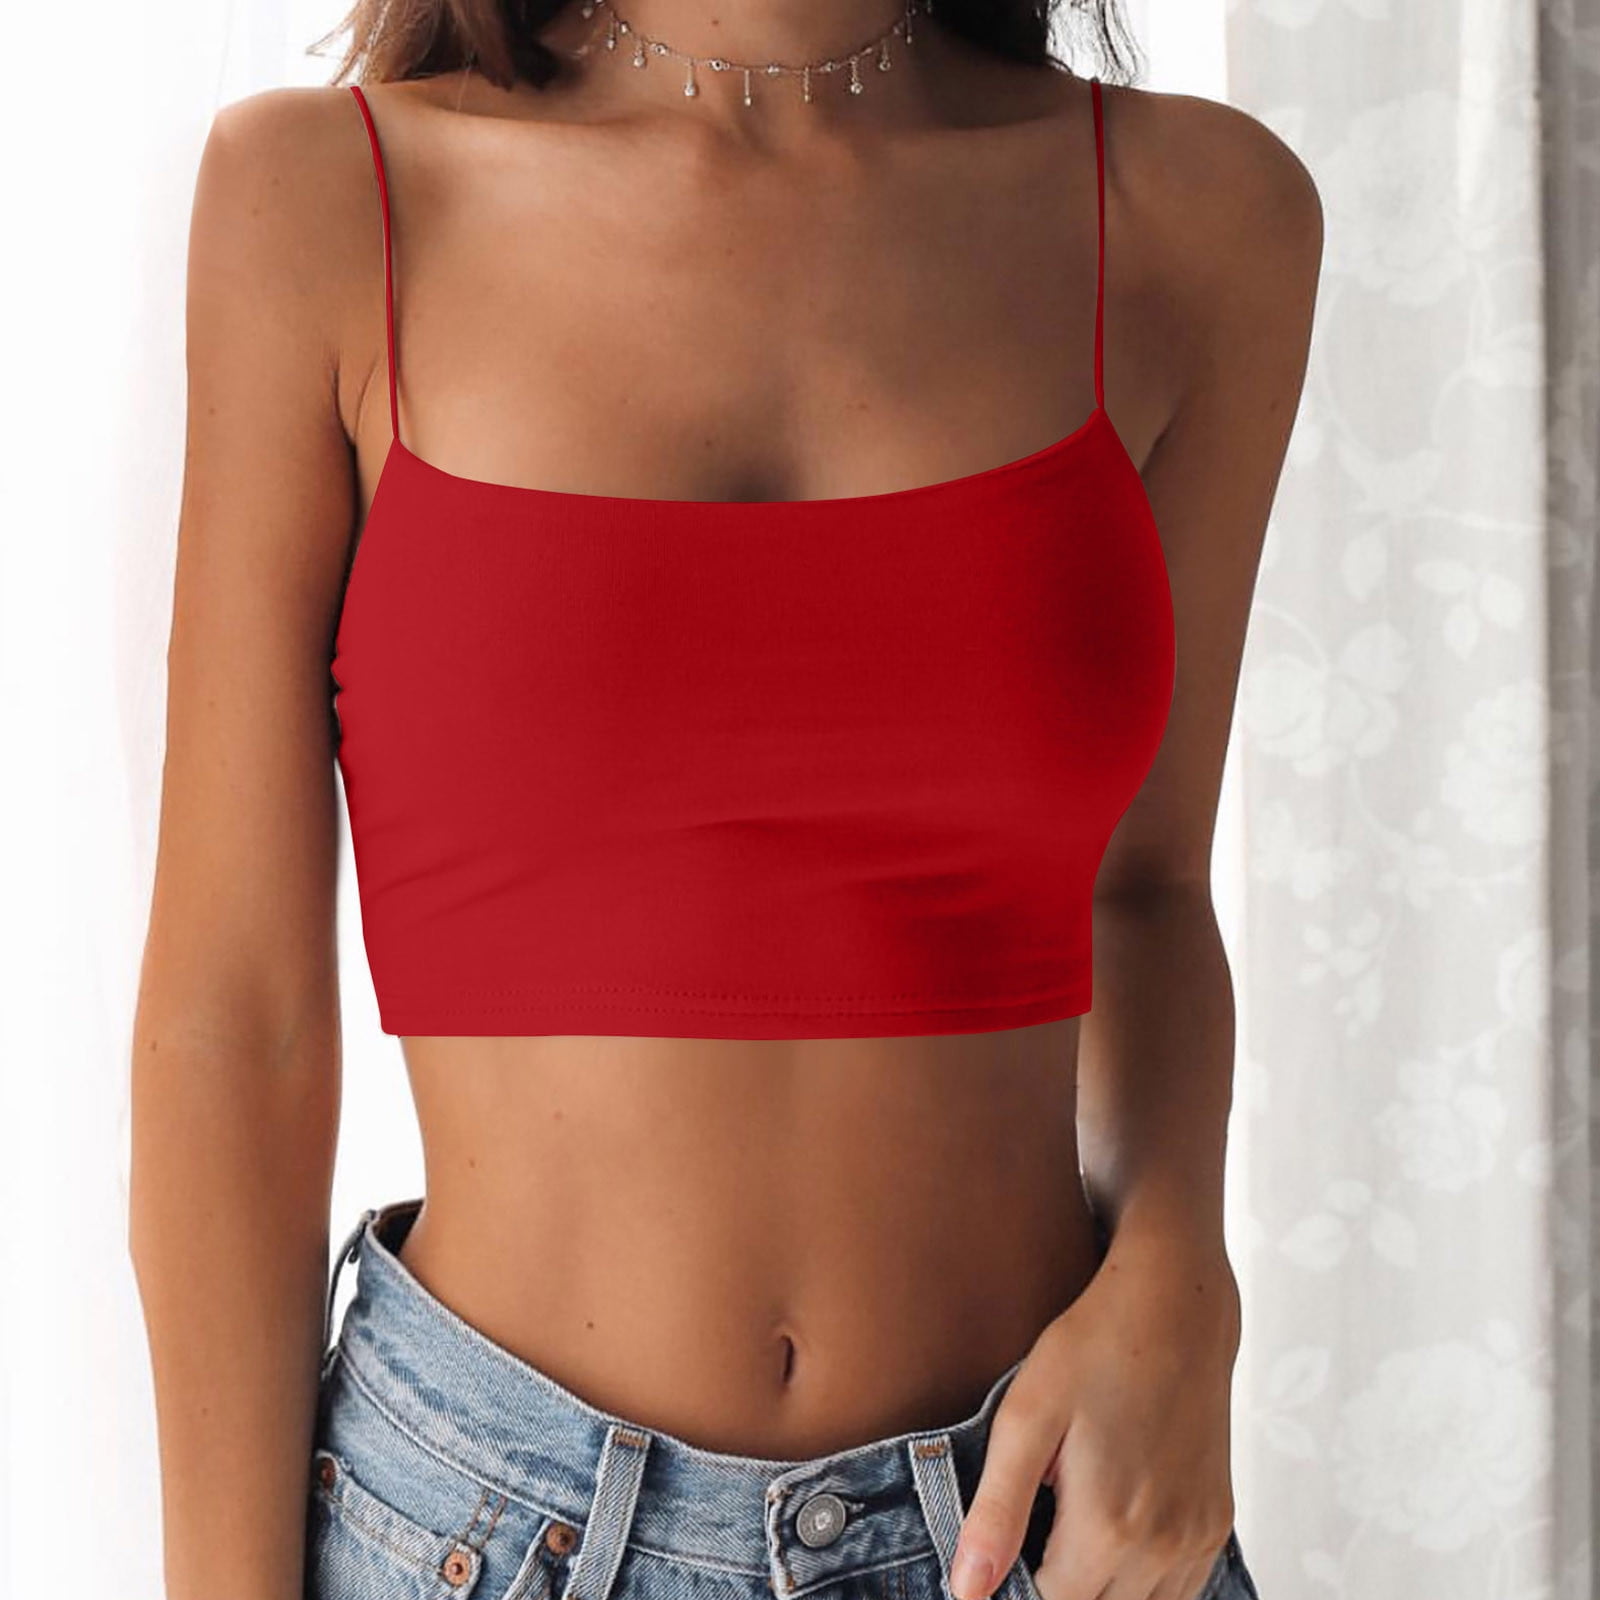 Spaghetti Strap Cropped Tank, Tank Top Cropped T-shirt, Beach Day Crop Top,  Lounge Wear, Women's Tops, Retro Style Crop Top, Work Out Top -  Canada